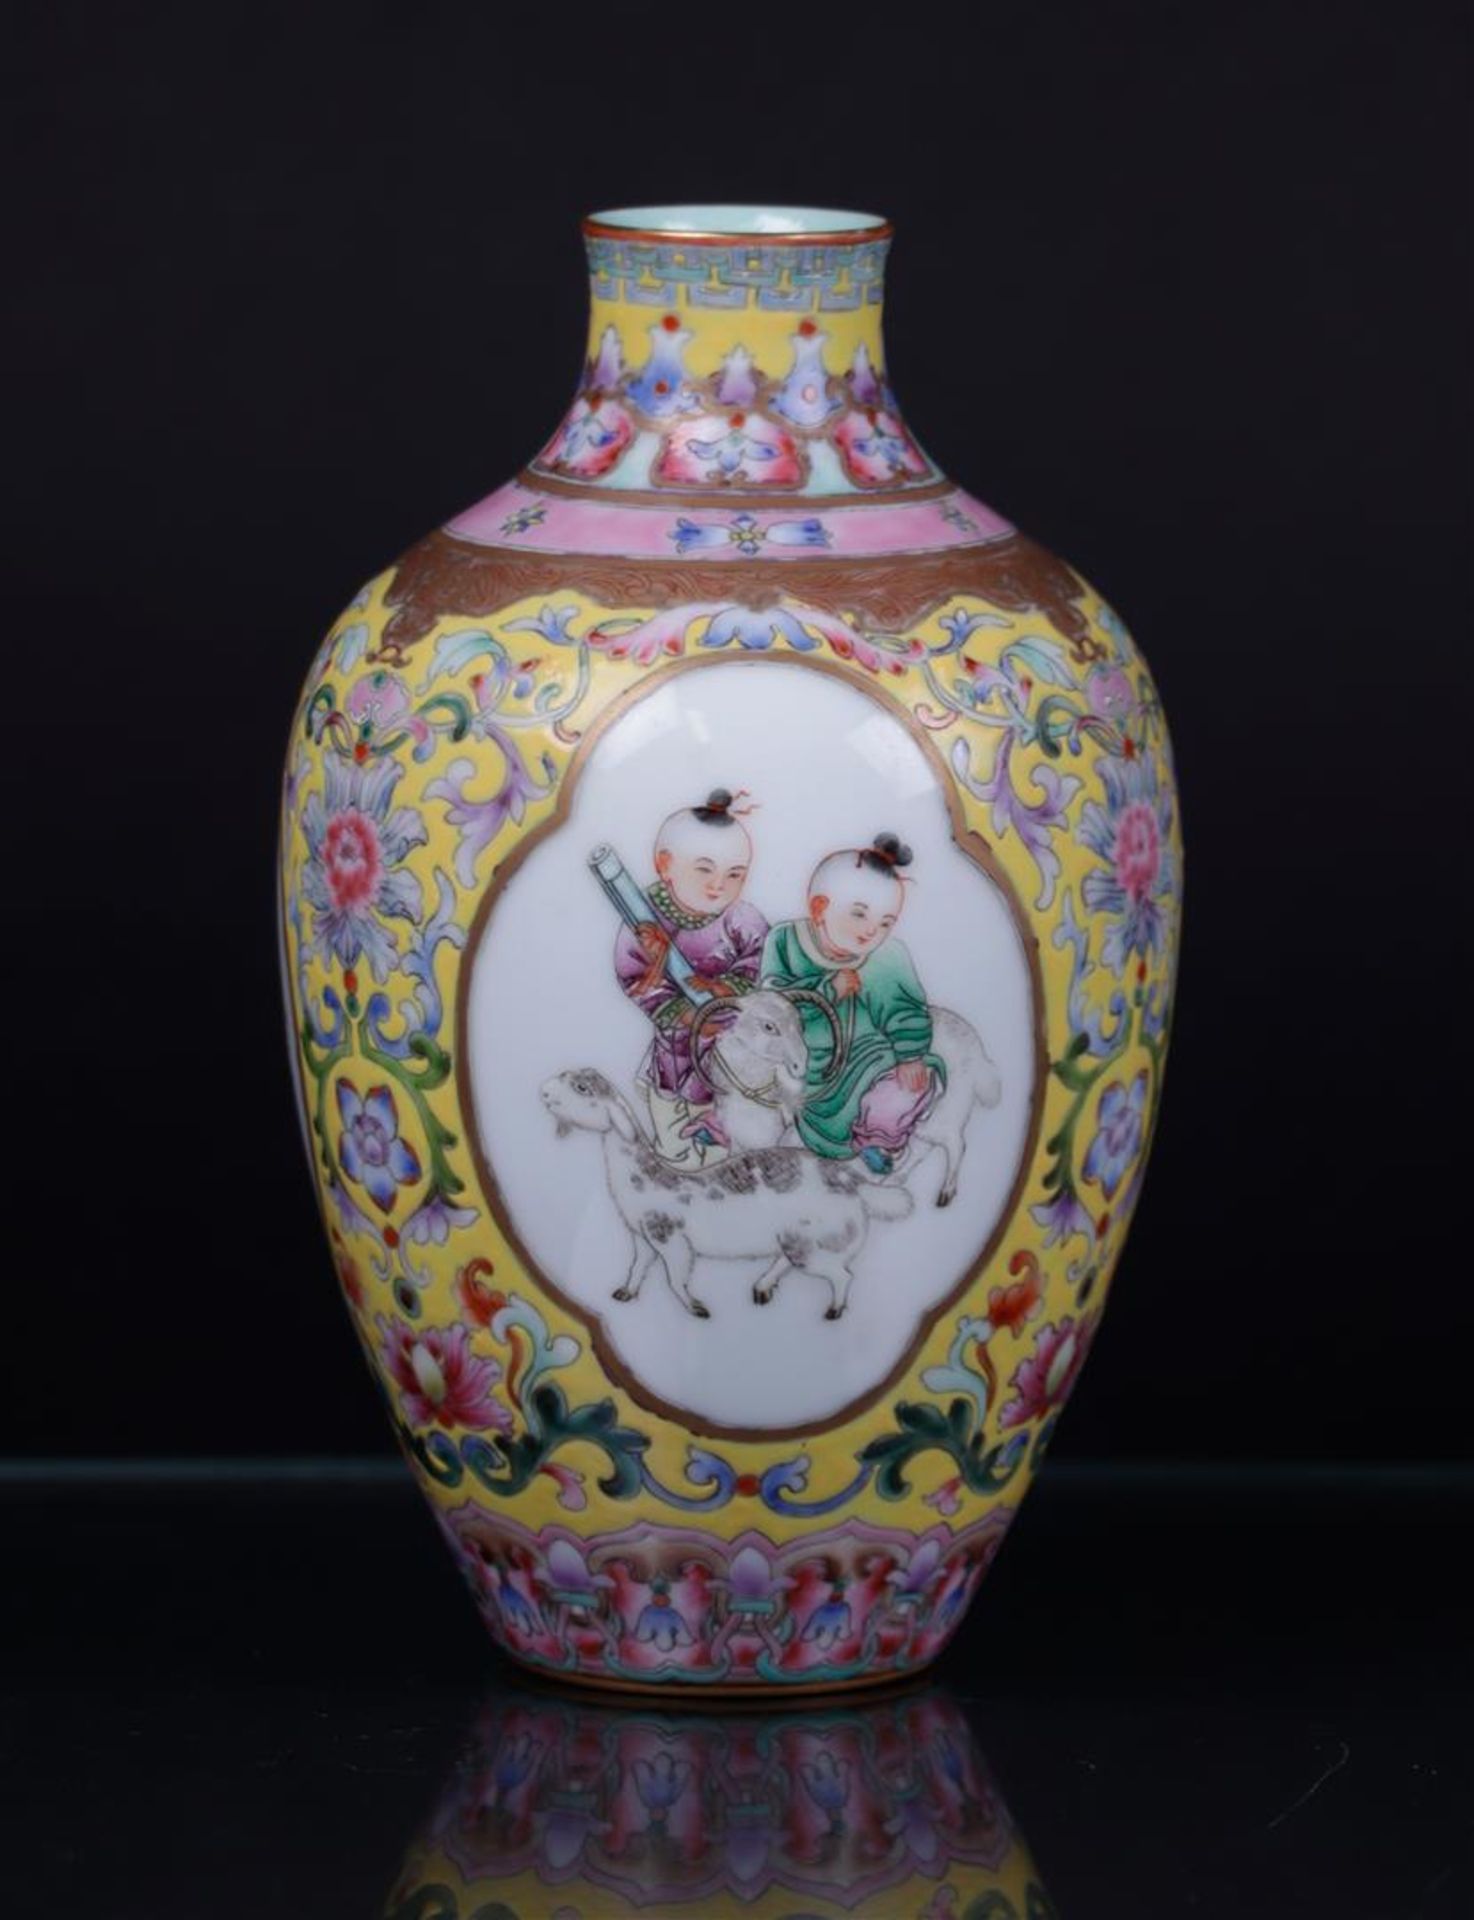 A porcelain famile rose vase decorated with figures in borders, marked Qianglong. China, republic.
H